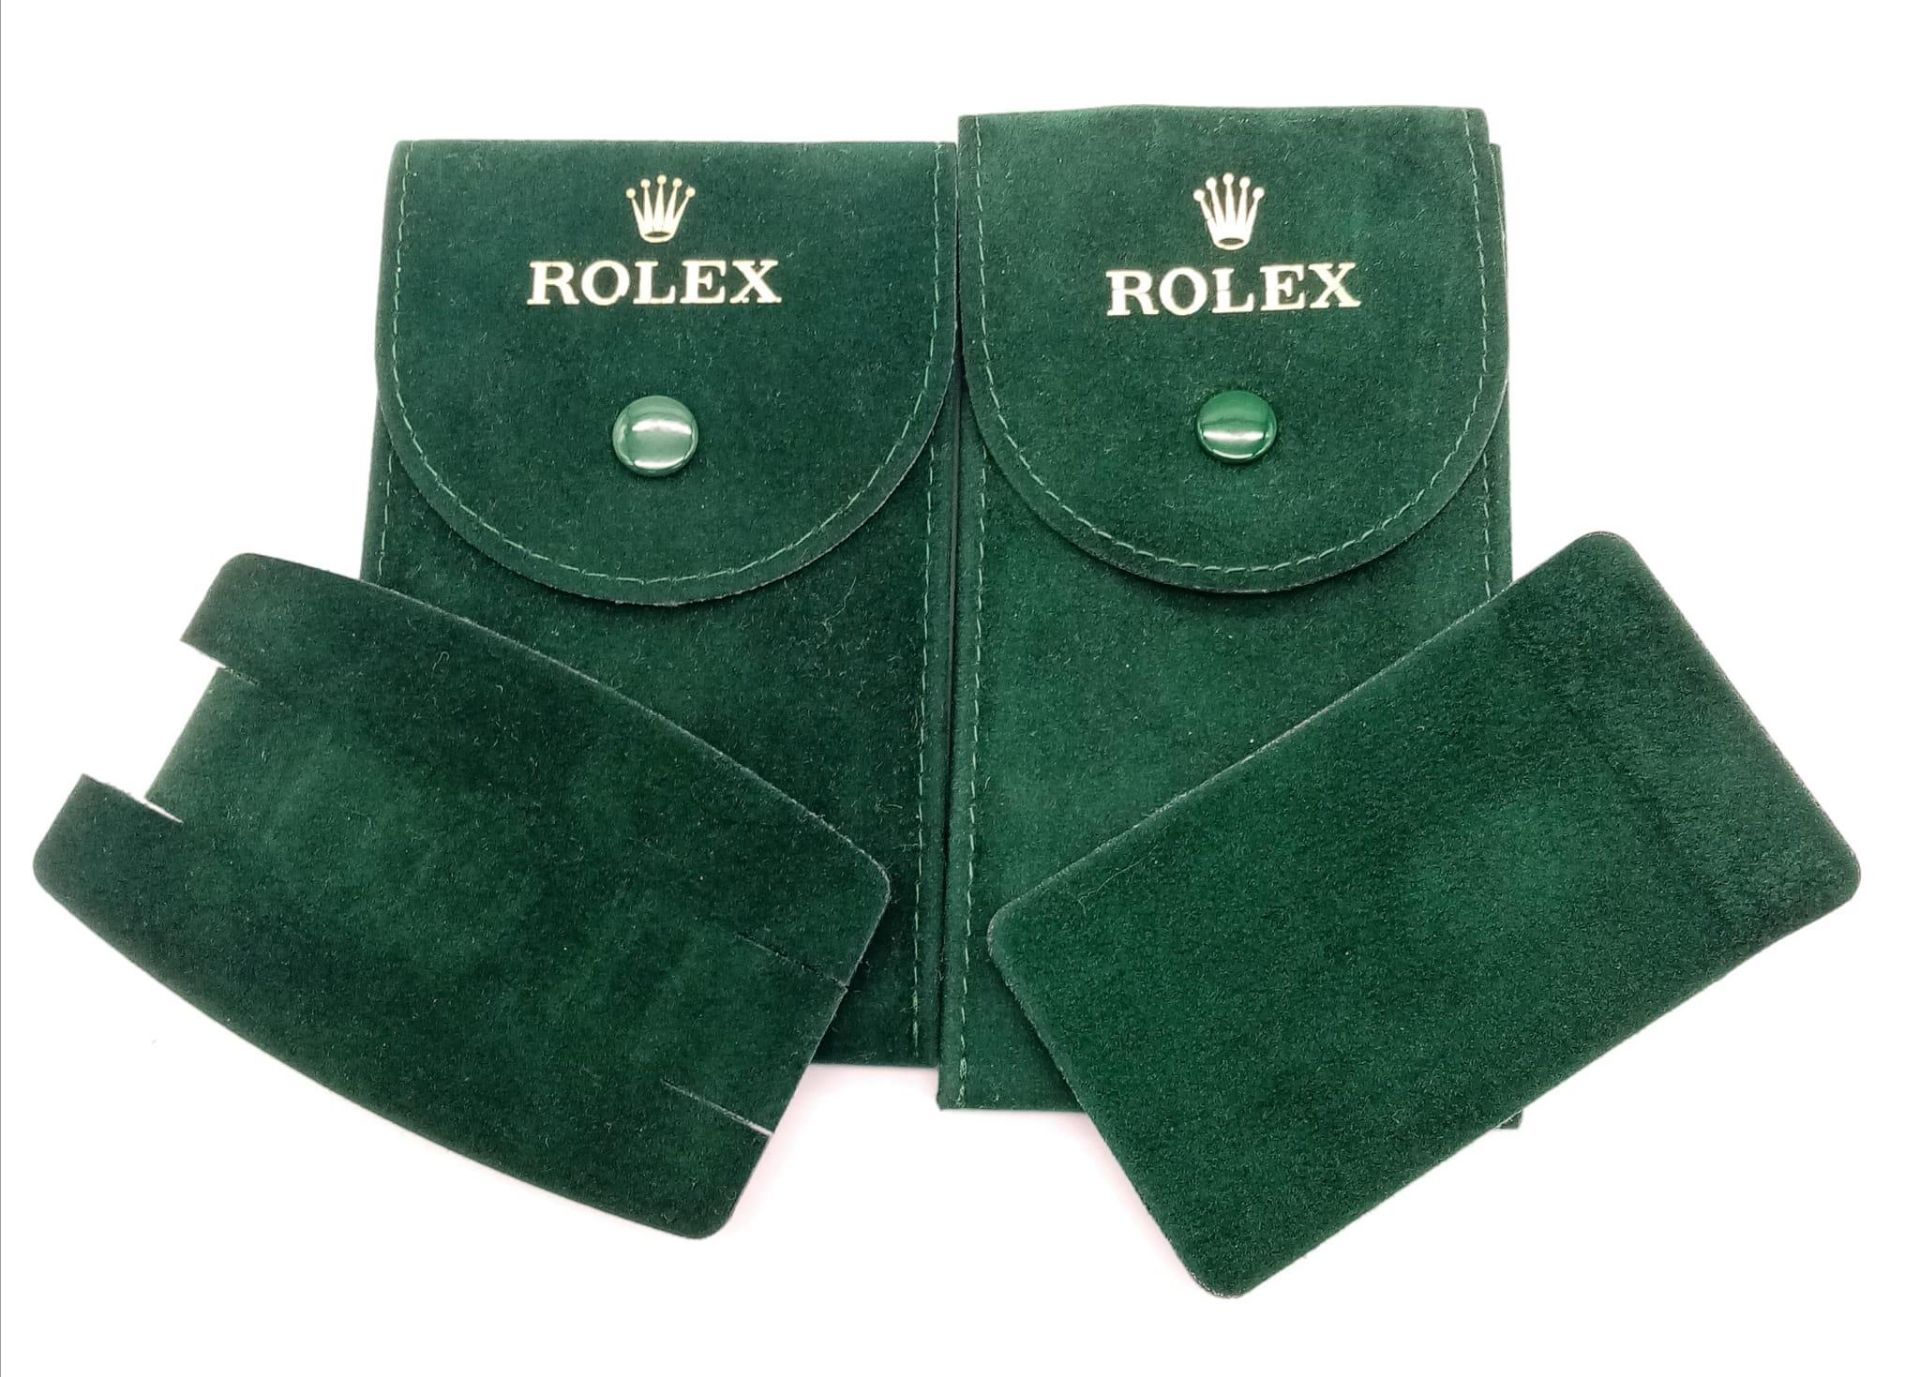 Two Different Sized Rolex Branded Travel Pouches. Soft green textile material. 12cm x 6cm and 11cm x